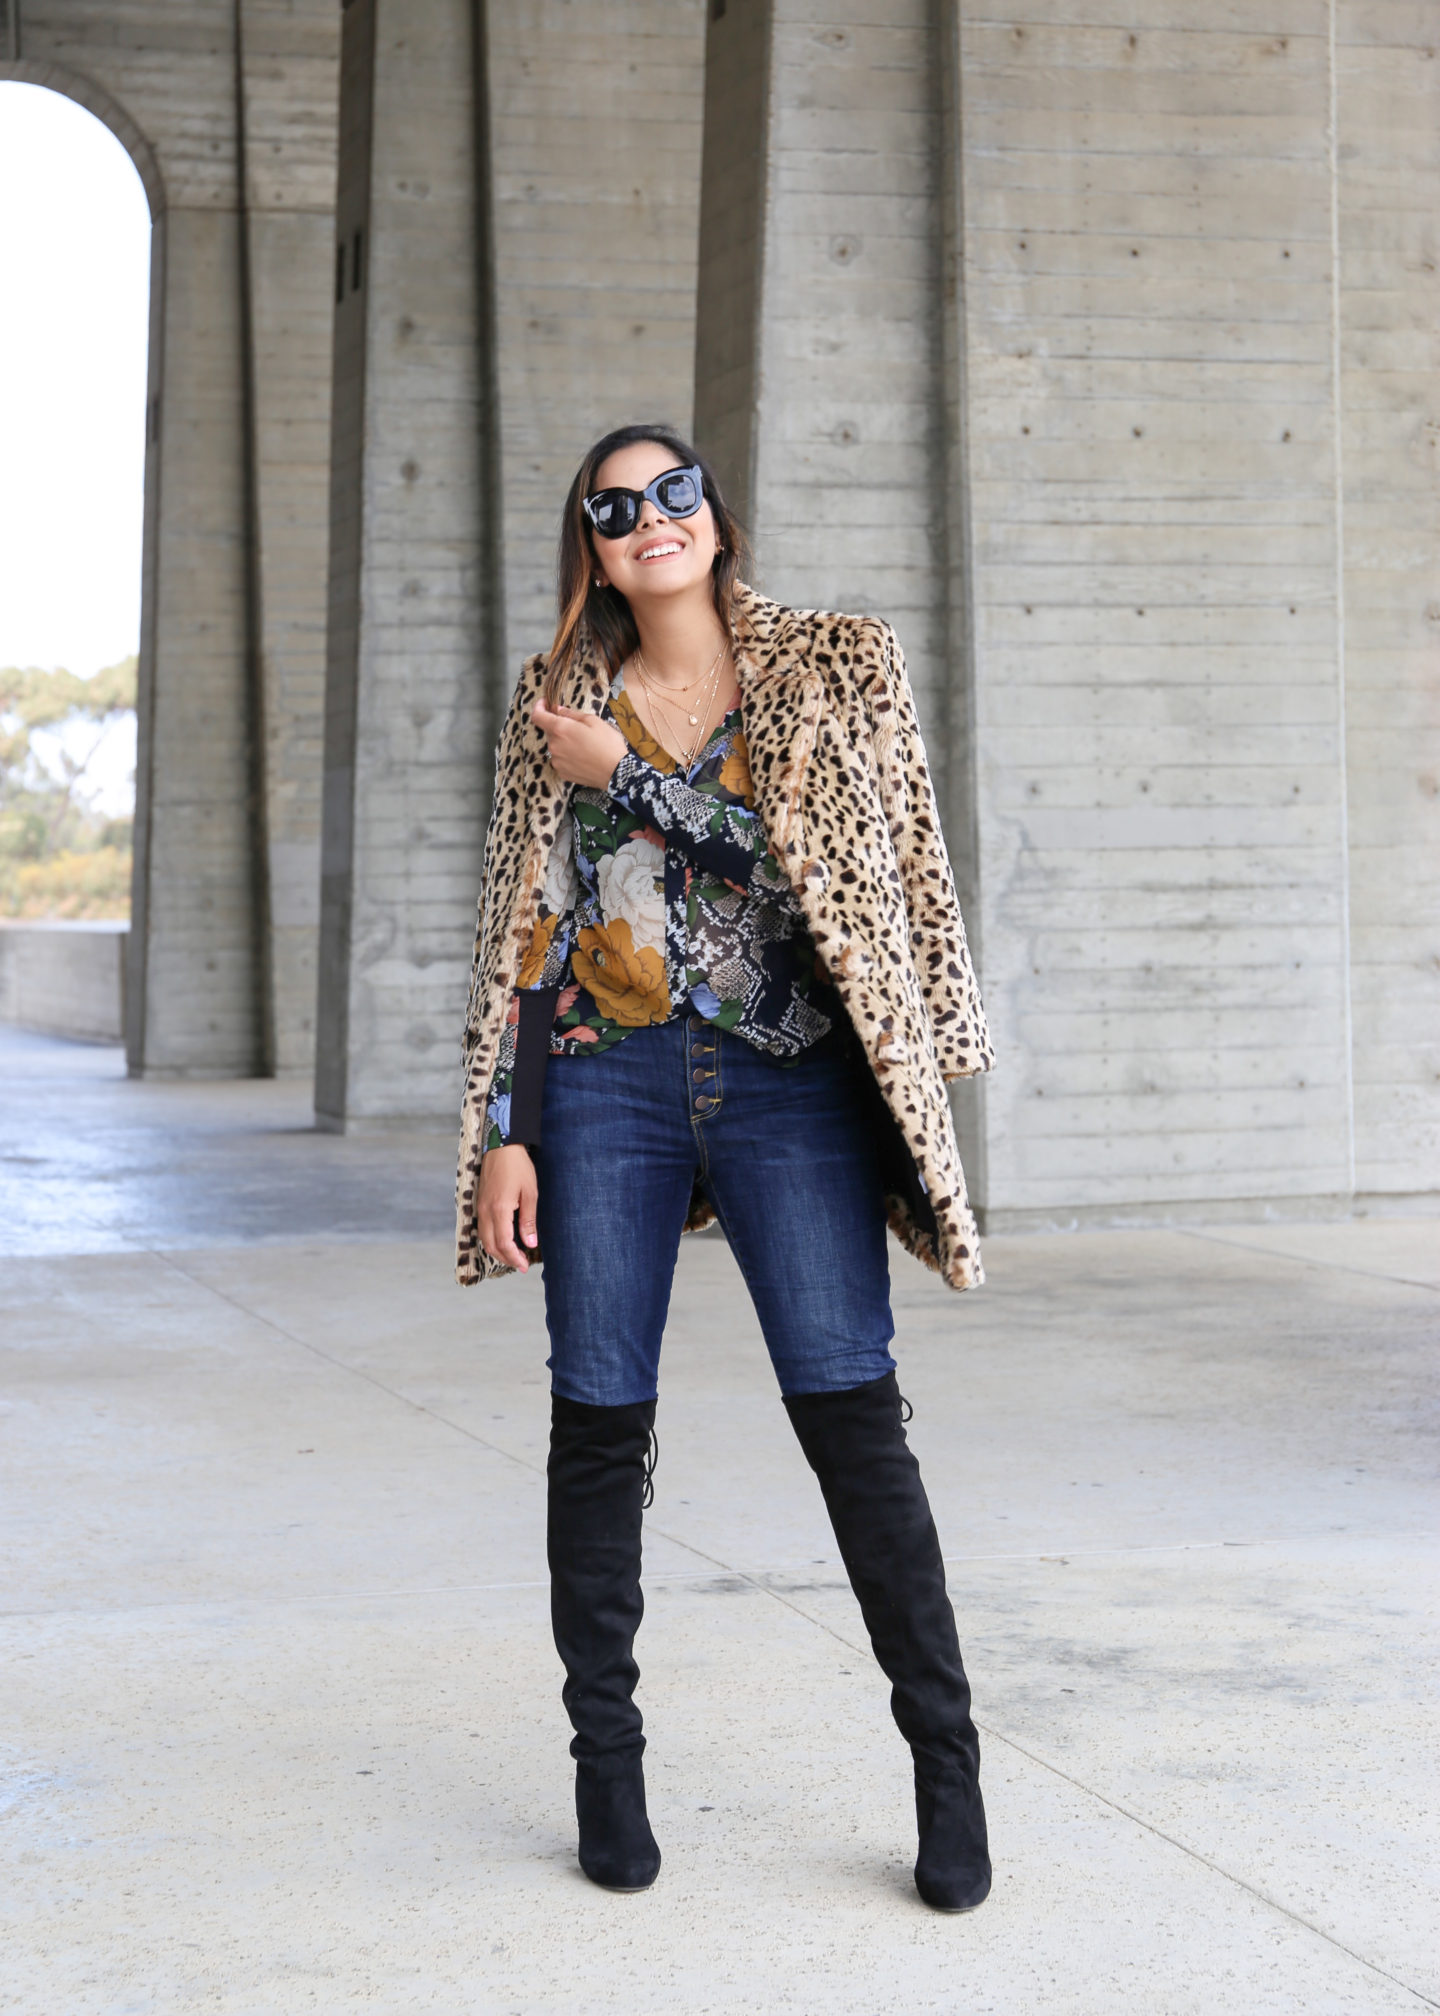 cabi Fall 2019 - How to mix animal prints and florals